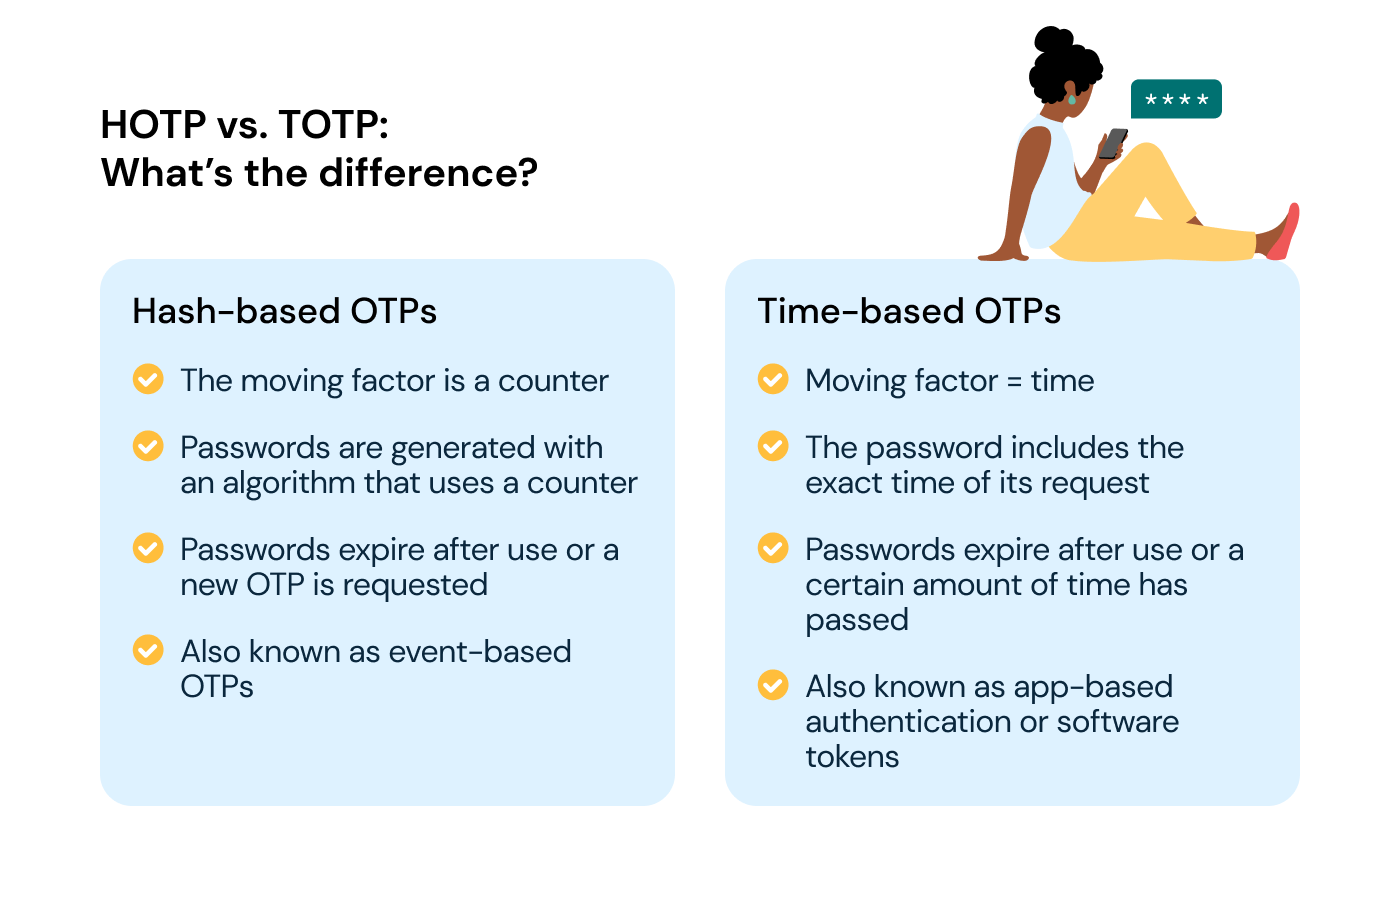 Chart showing differences between hash-based OTPs and time-based OTPs (HOTP vs. TOTP)